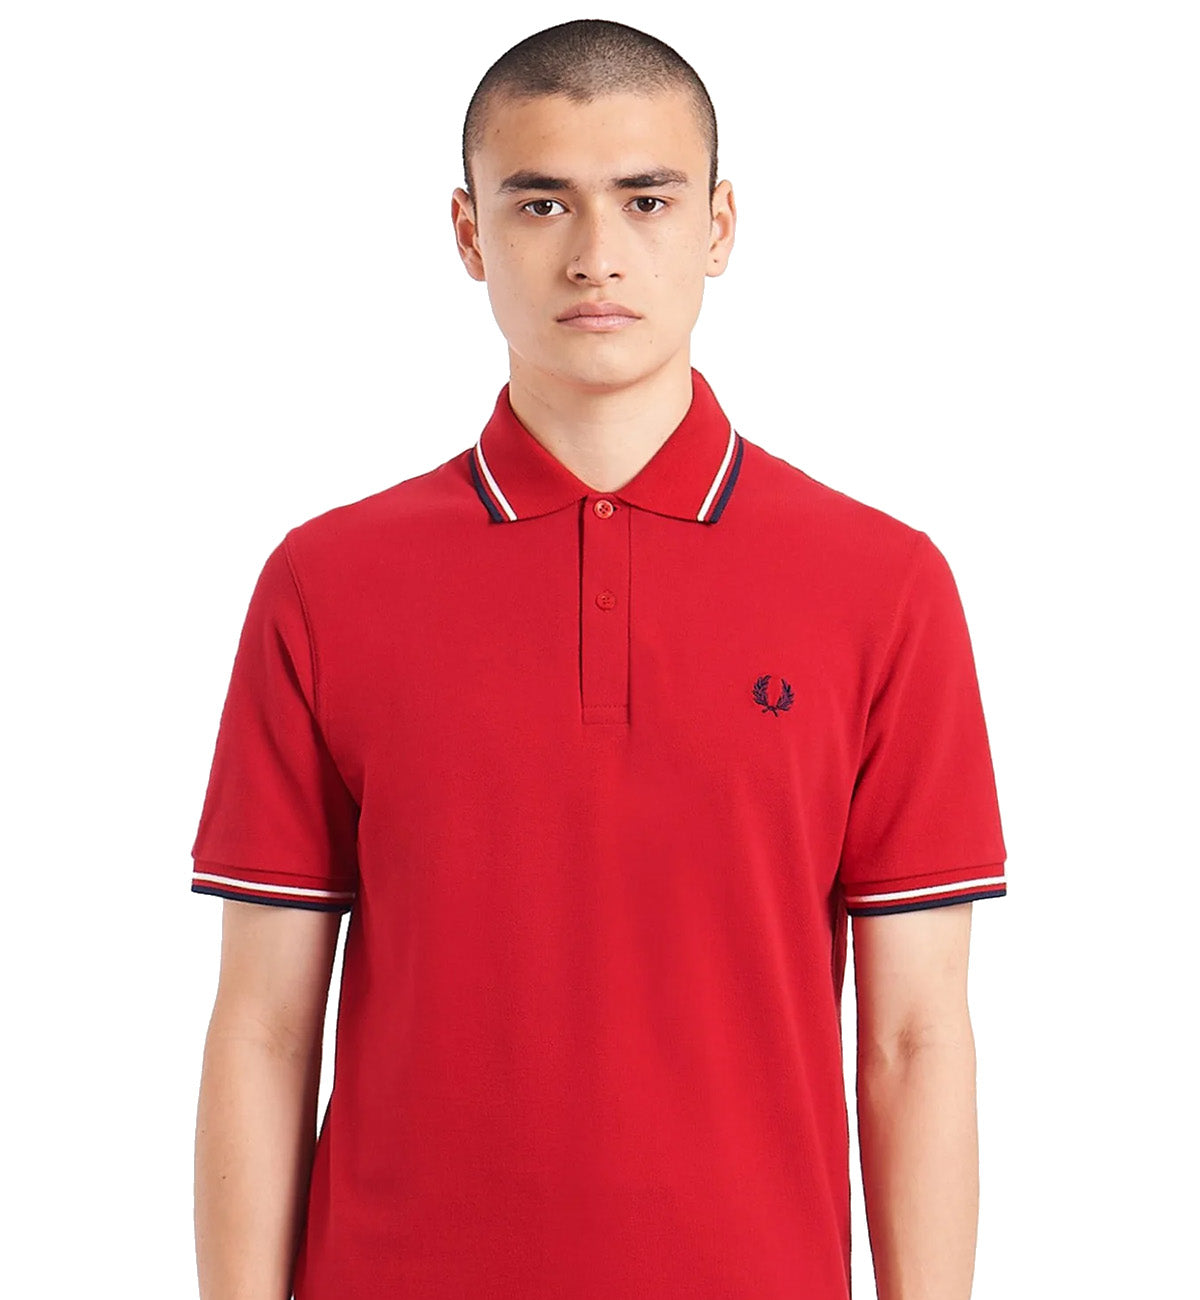 Fred Perry Black White Stripe Red Polo Shirt